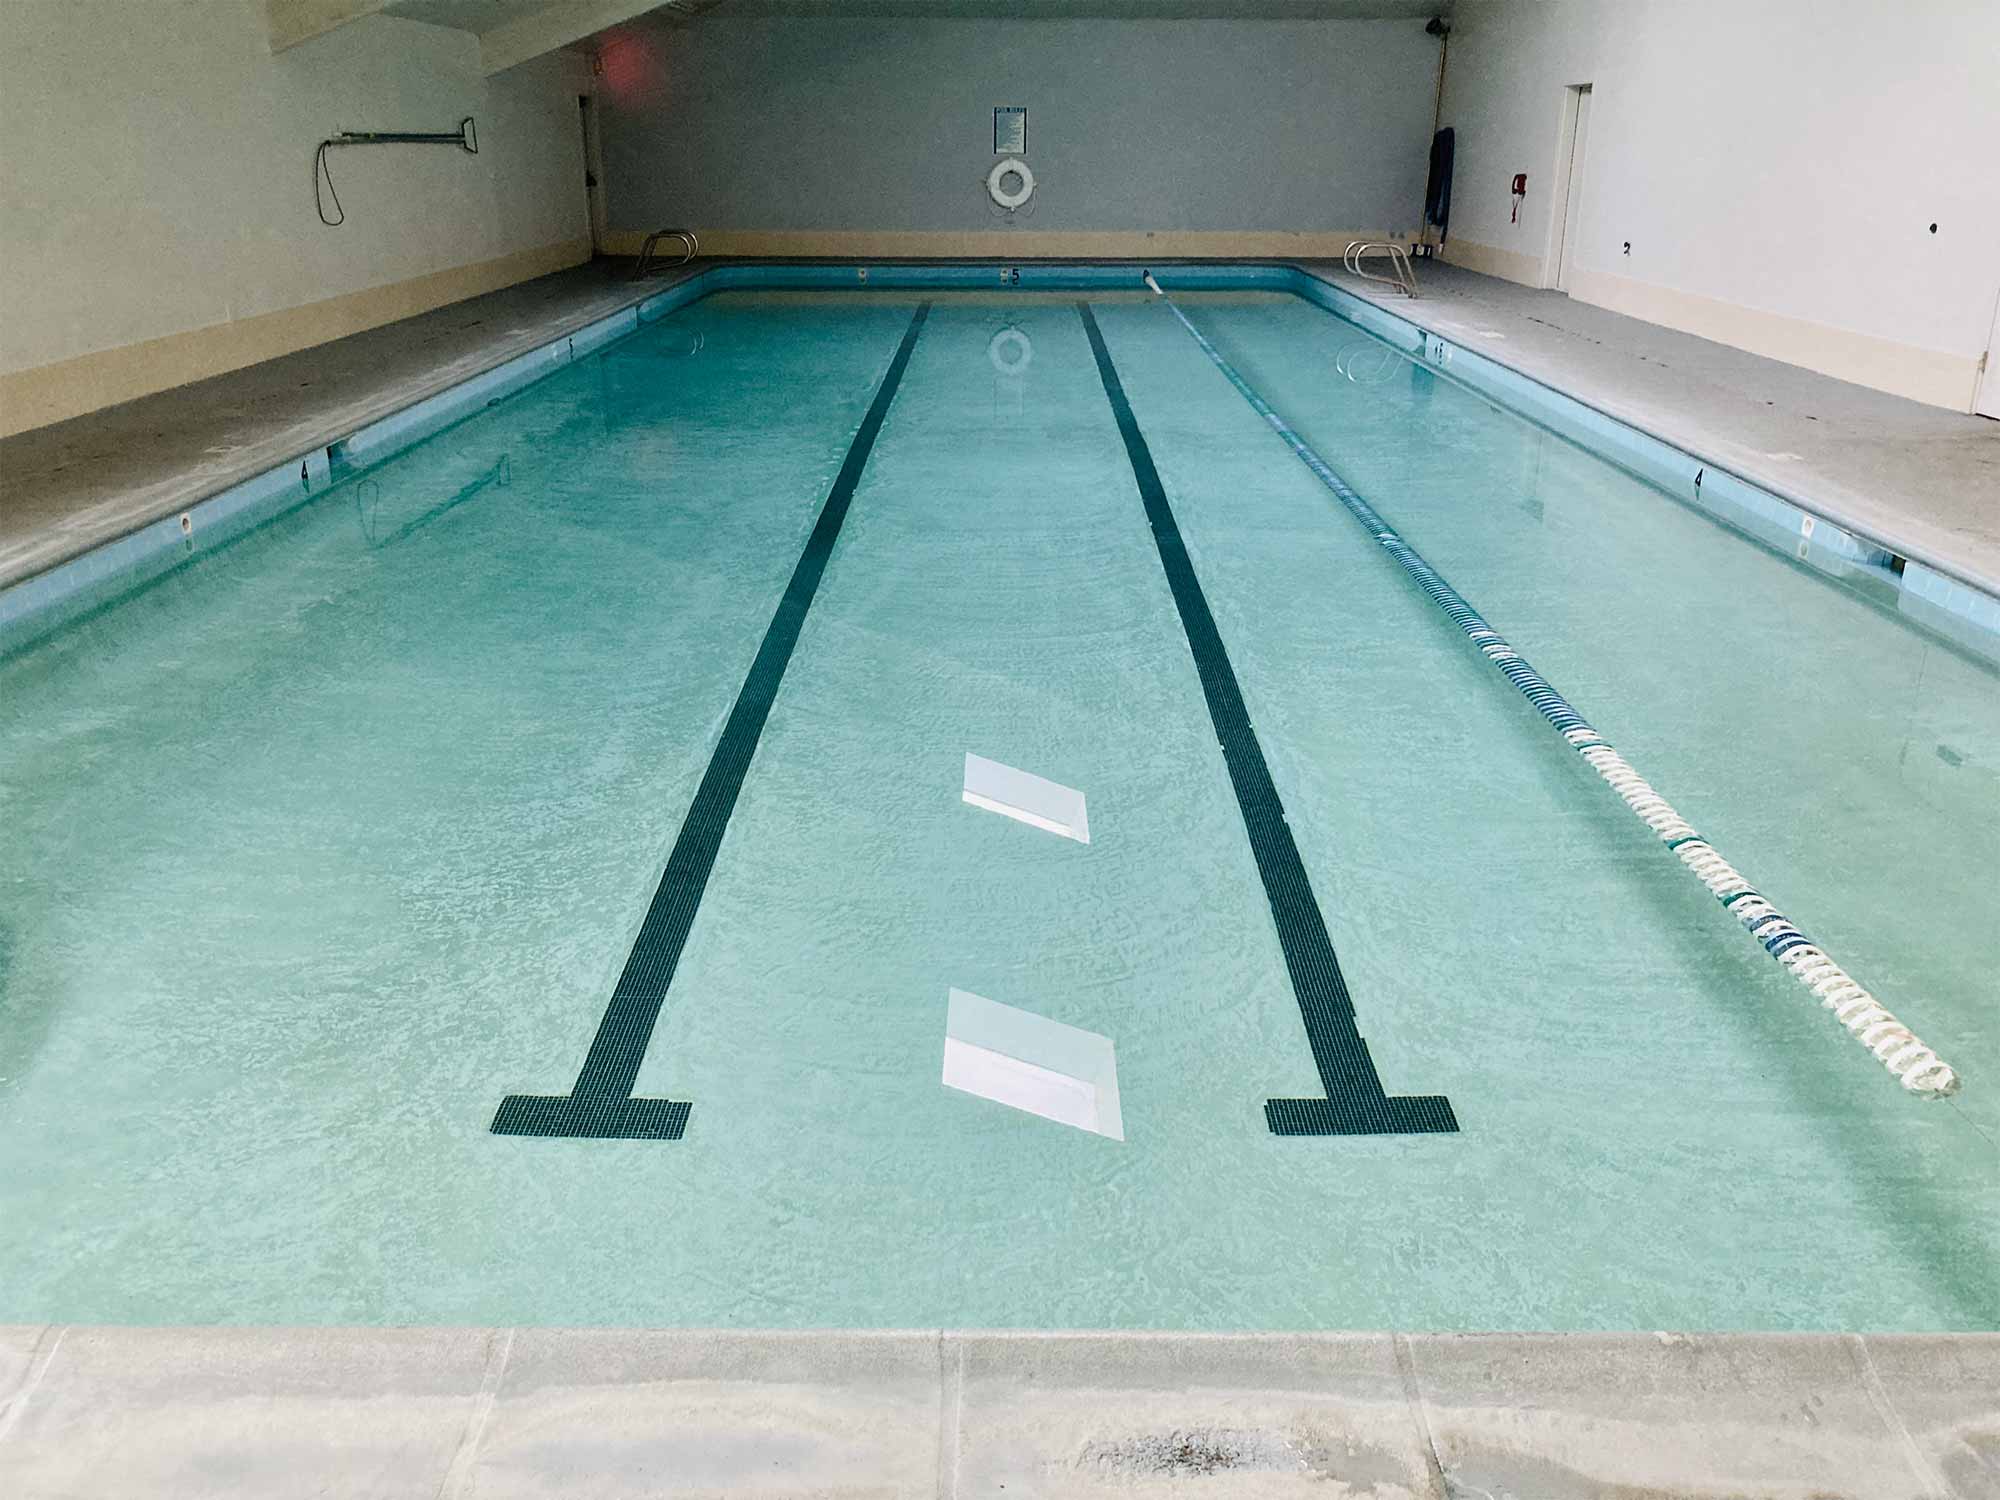 A worn swimming pool, with two distinct lanes with tile on the bottom and one lane line marking off the right side of the pool, grey and white walls and rescue and cleaning gear hung on the walls